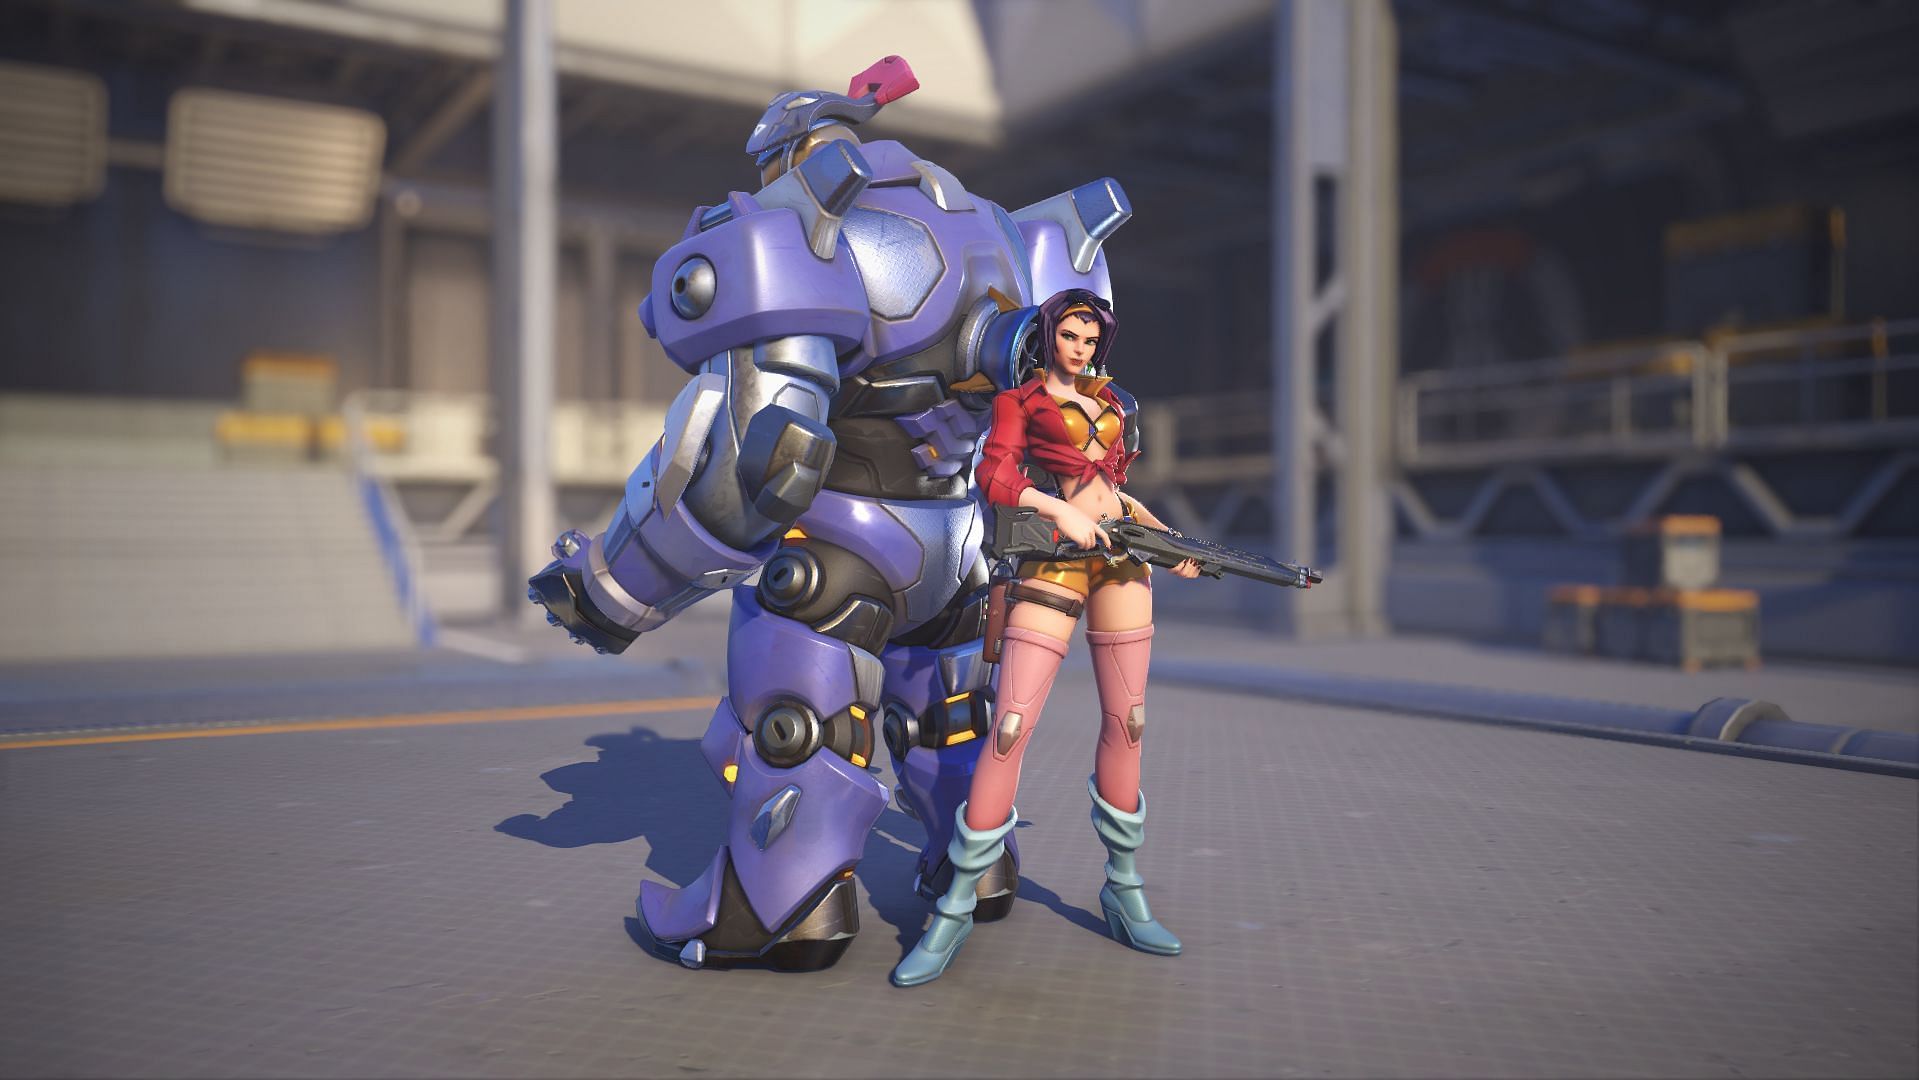 Faye Valentine is the best Ashe skin in Overwatch 2 (Image via Blizzard Entertainment)